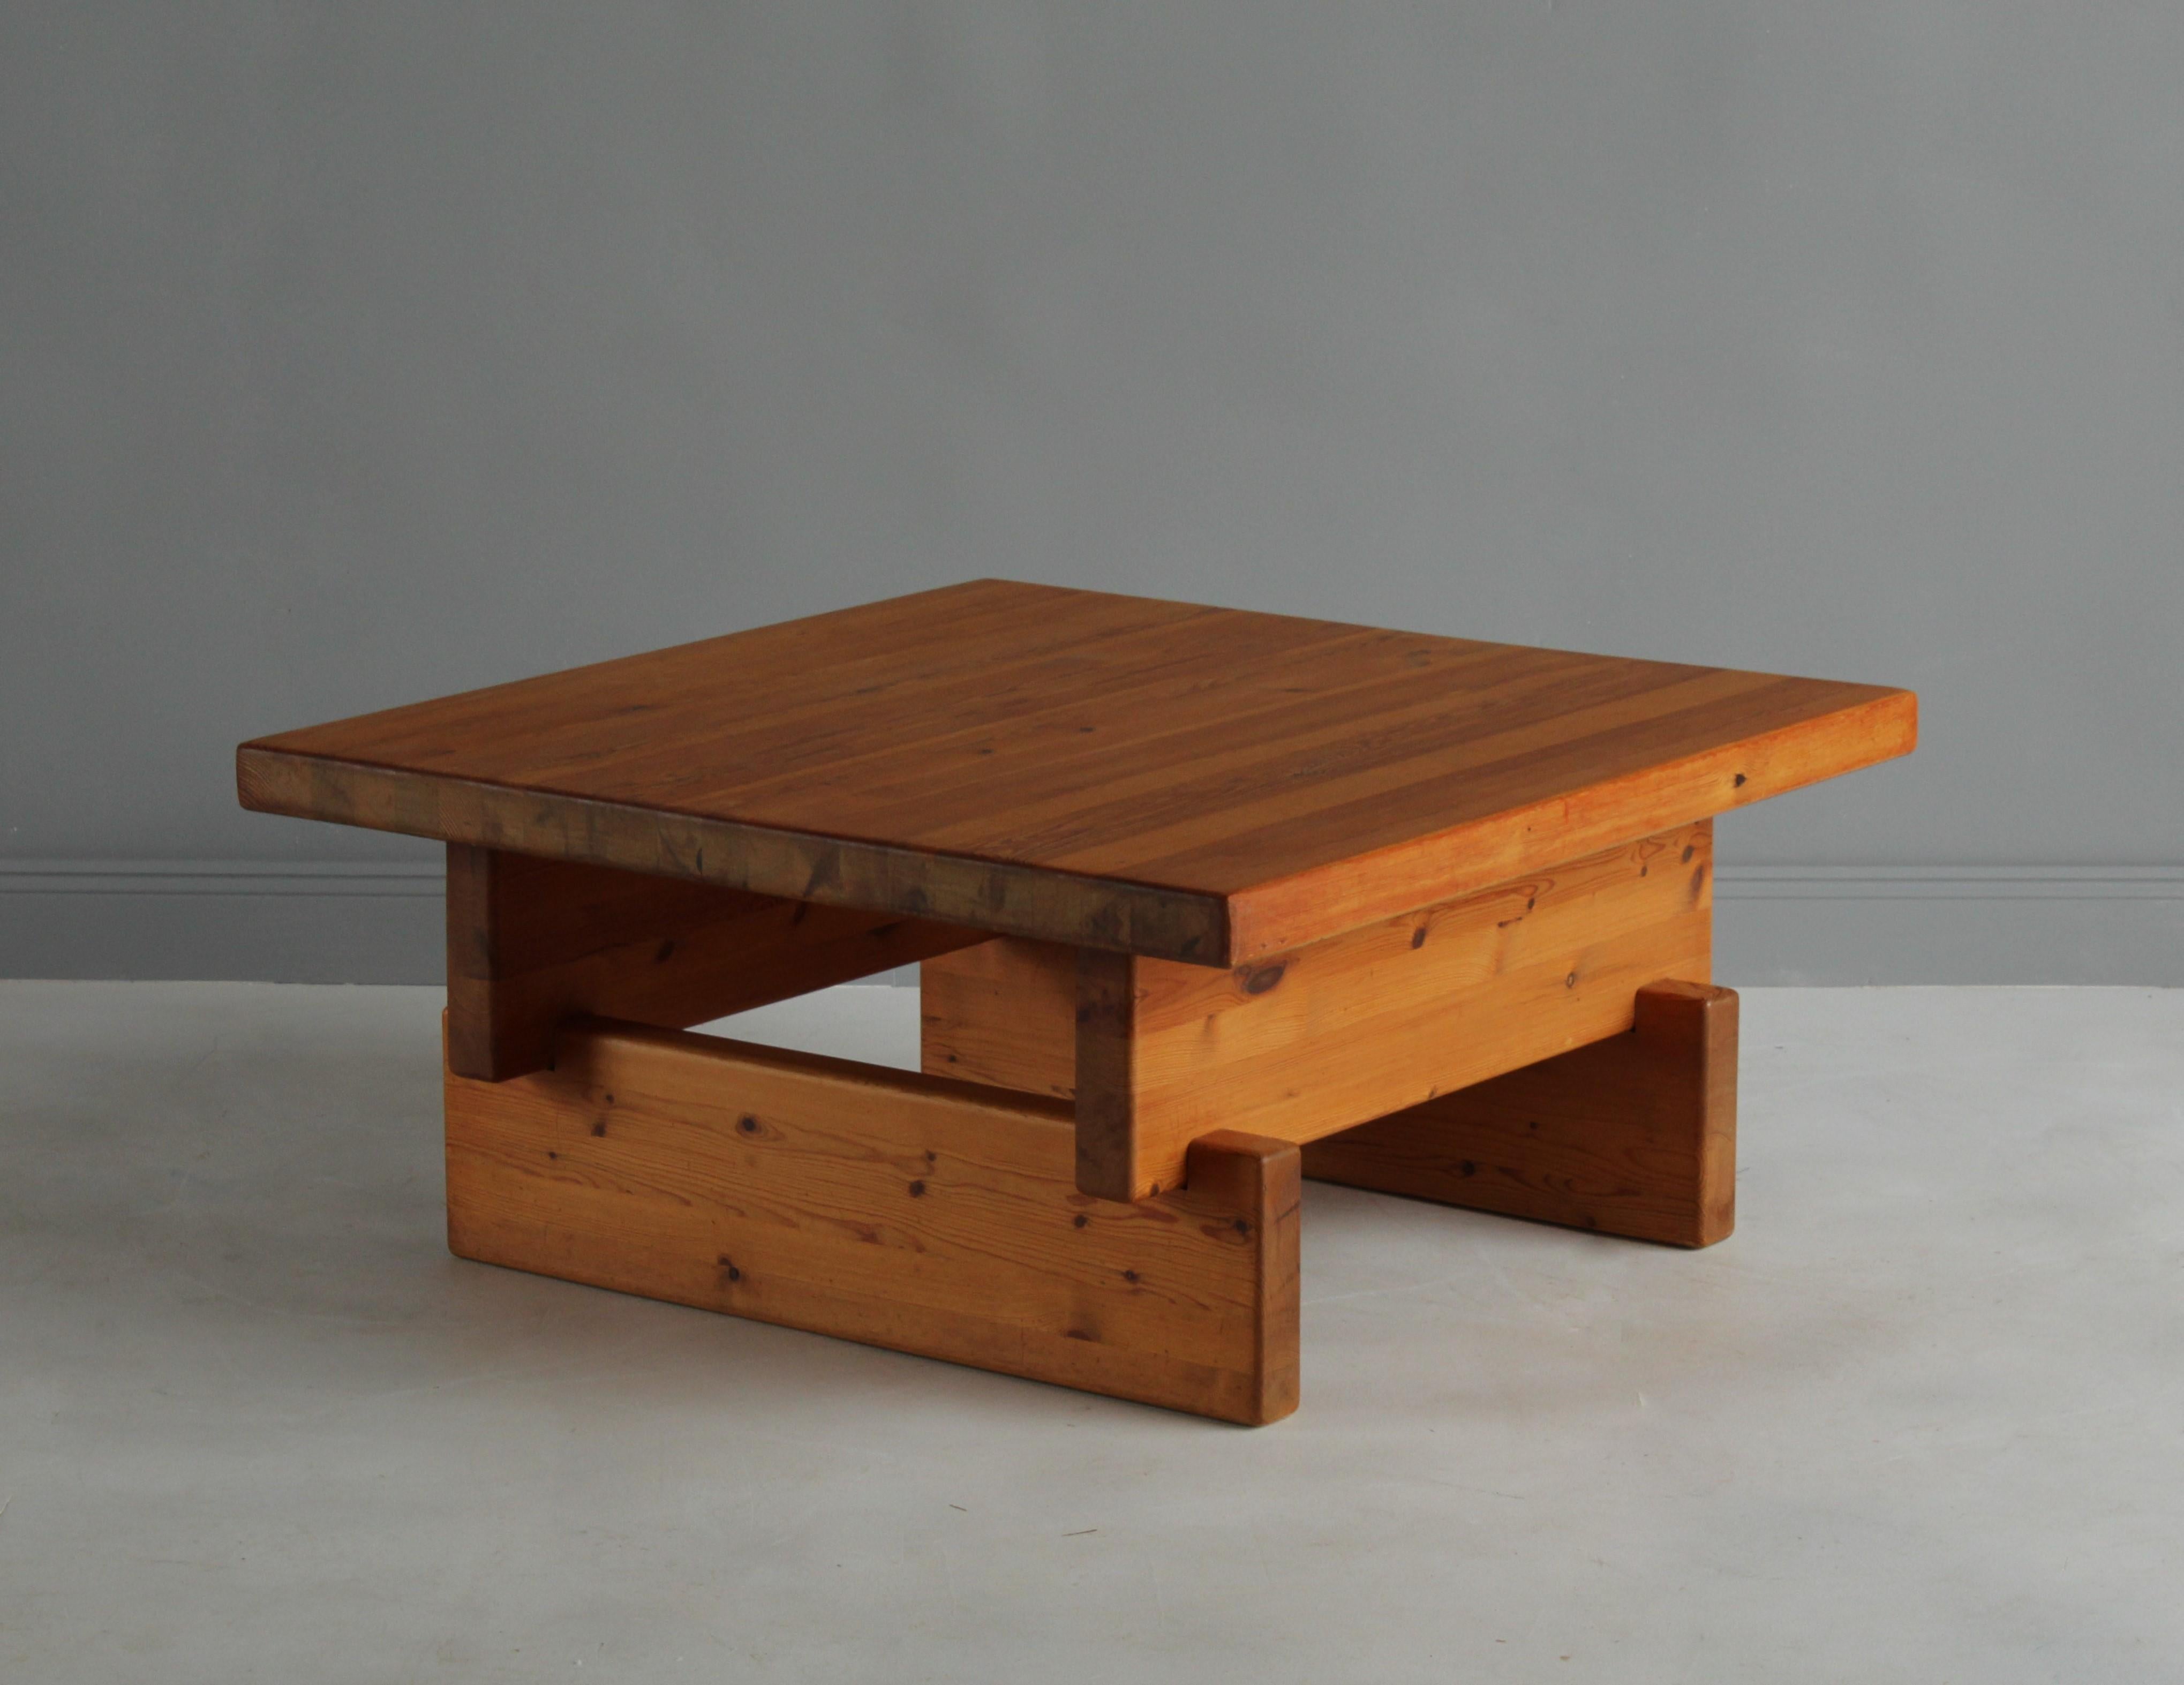 A modernist / Minimalist studio coffee table. Attributed to Roland Wilhelmsson. Most likely produced by Karl Andersson & Söner. Construction in sold pine blocks stacked on each other. 



